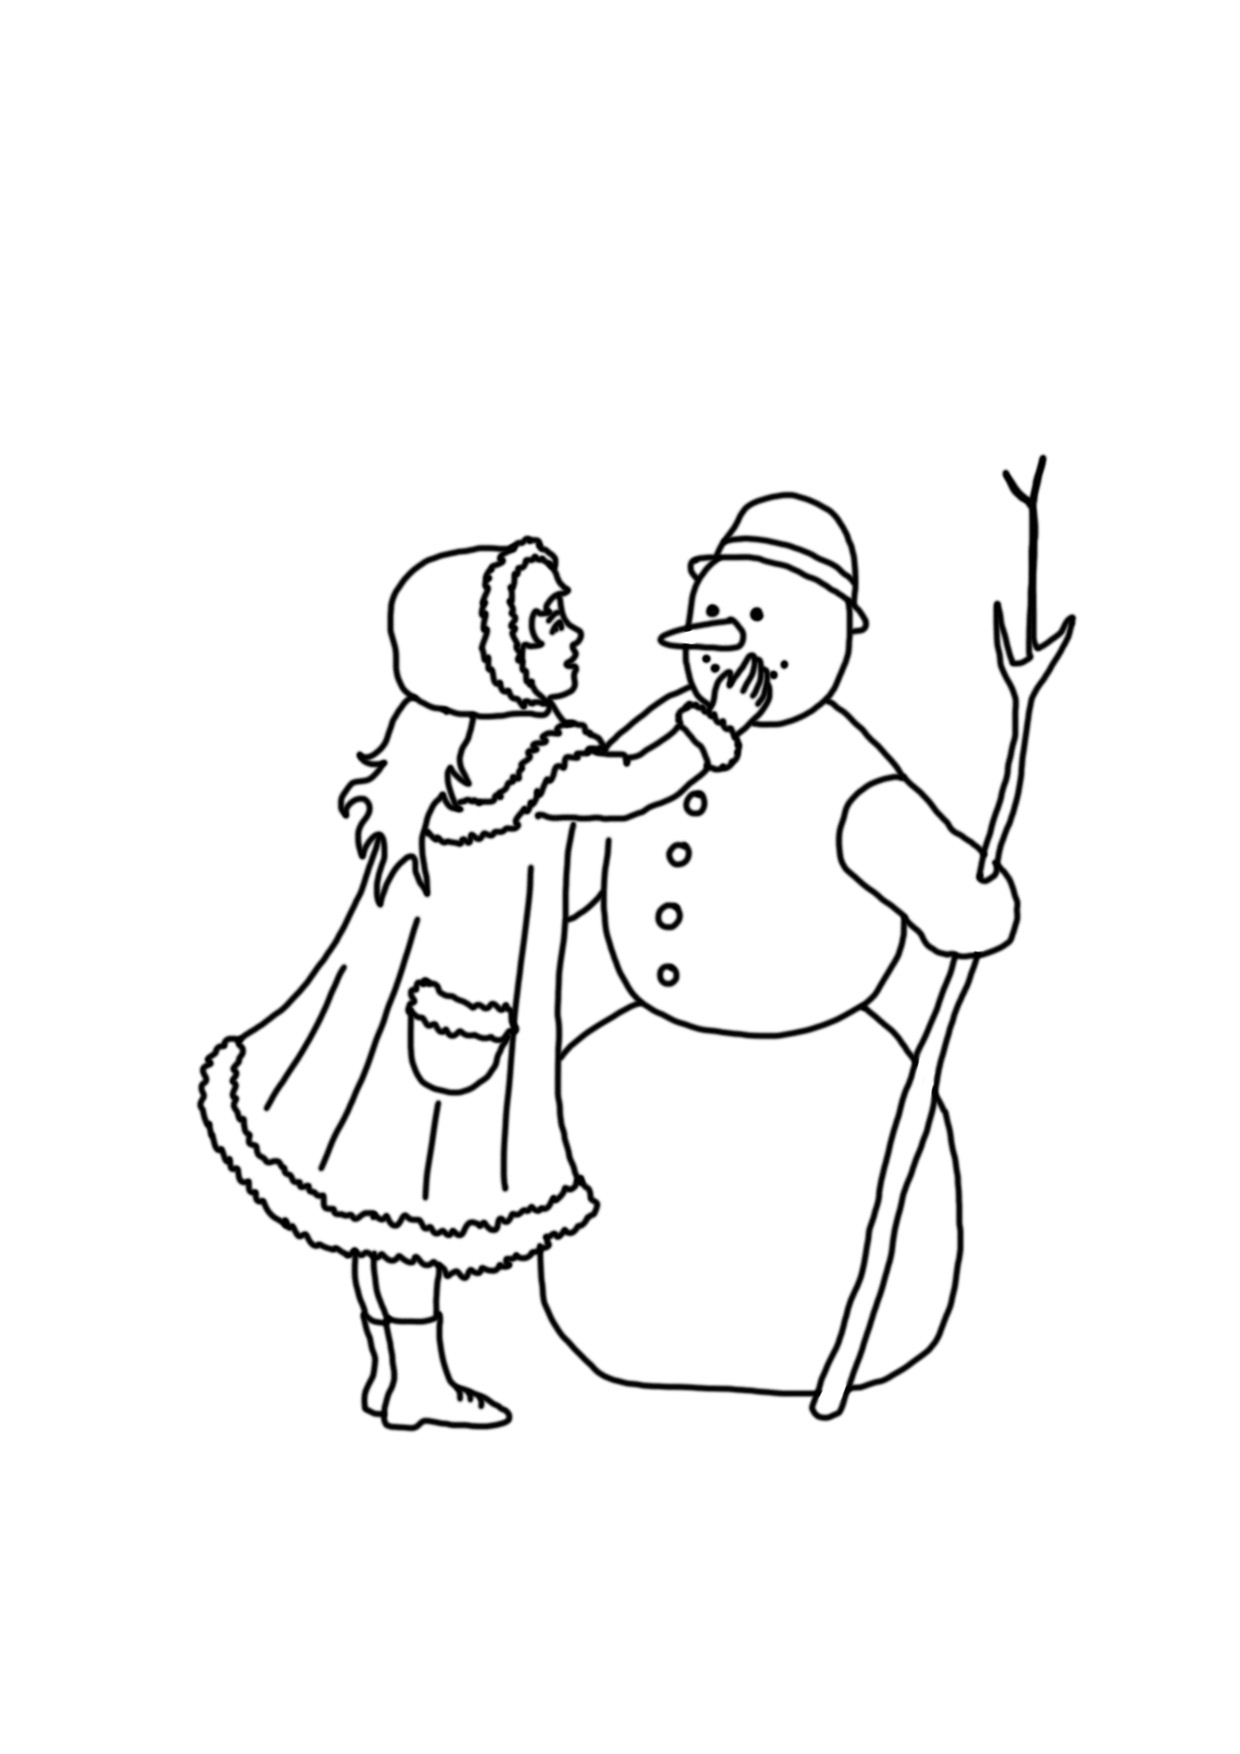 coloring page with girl and snowman